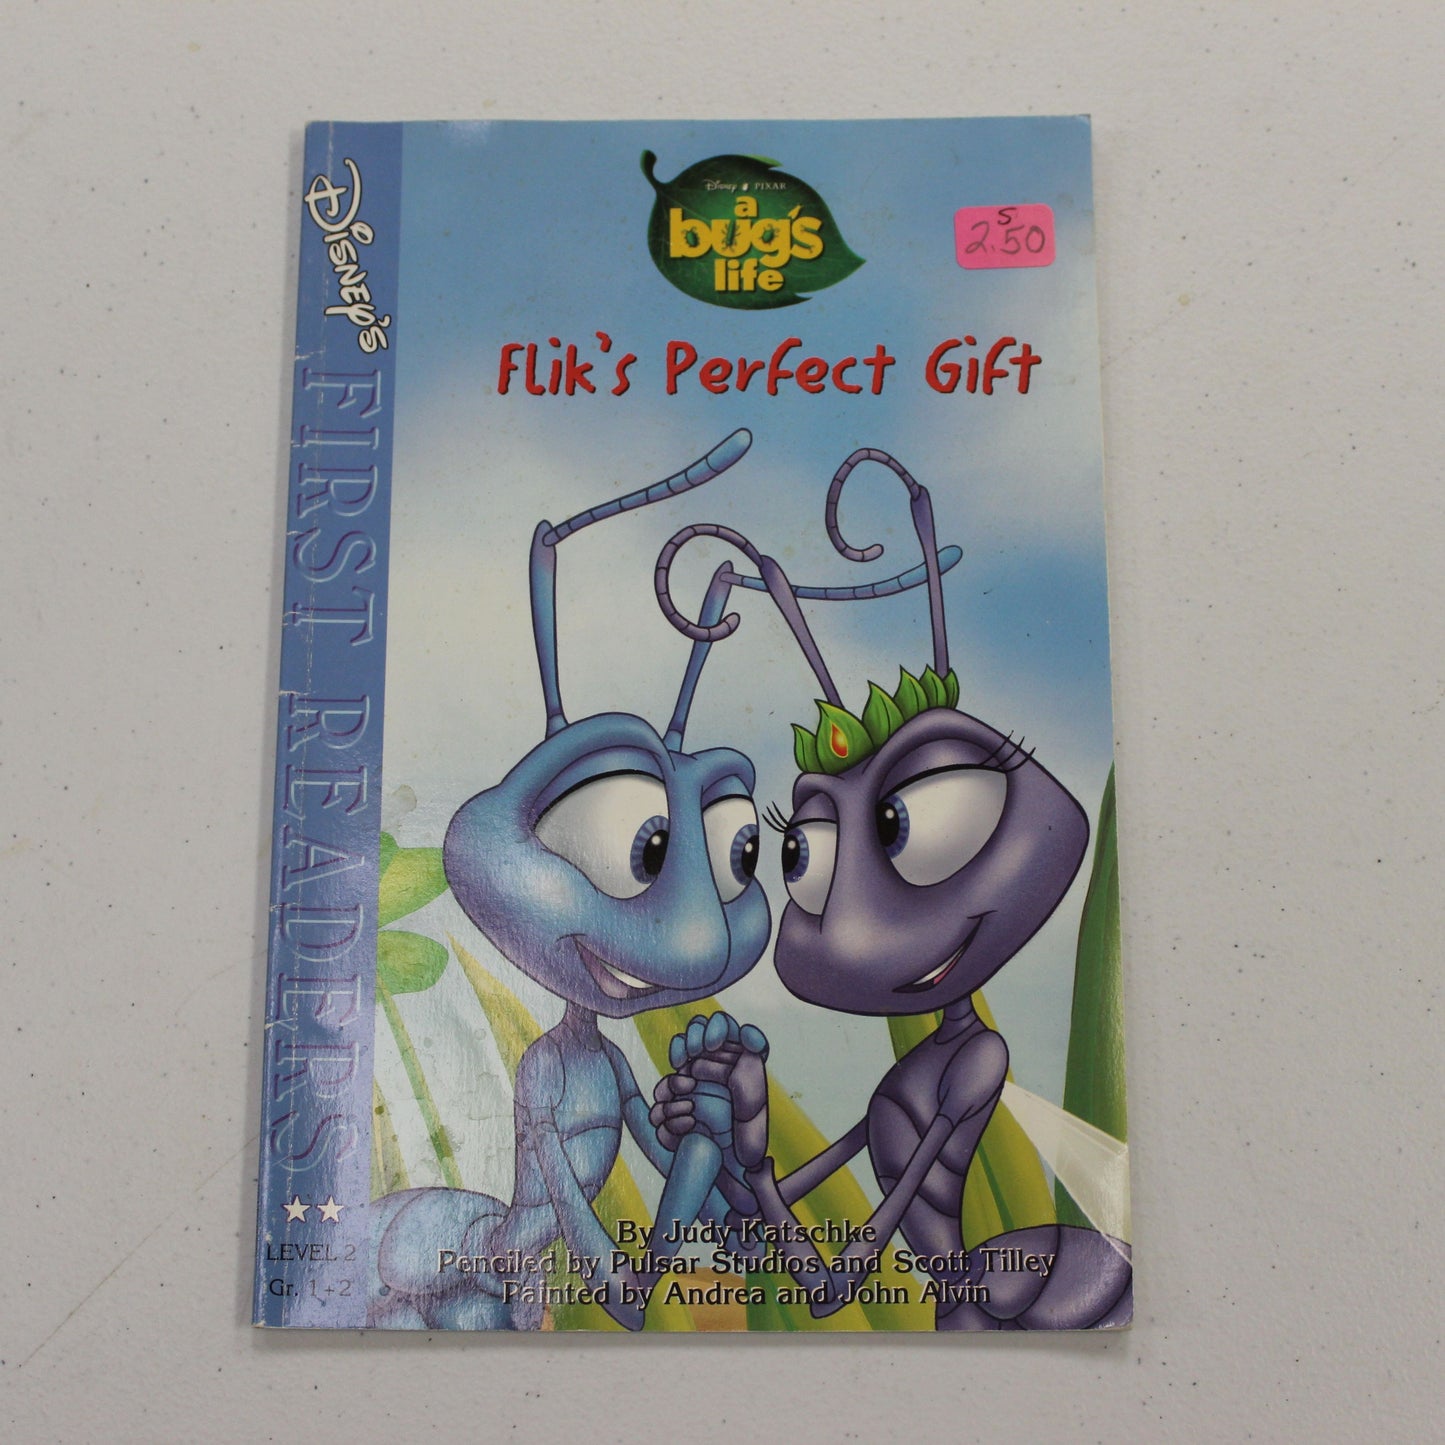 A BUG'S LIFE: FLIK'S PERFECT GIFT